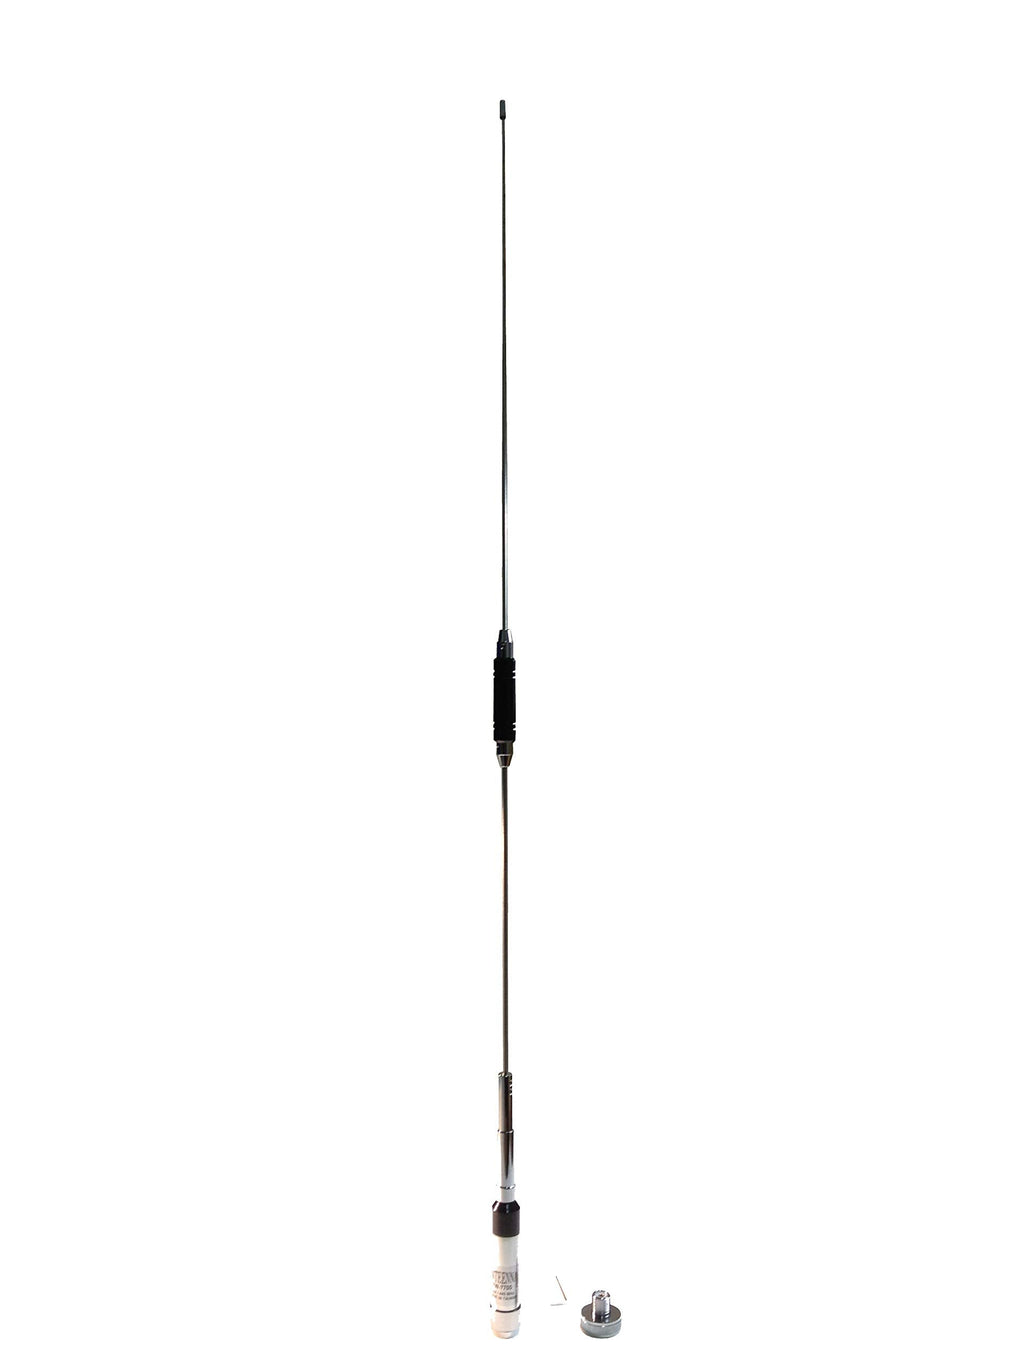  [AUSTRALIA] - Anteenna TW-7700 Ham Mobile Antenna with UHF Male Connector 144/440MHz VHF/UHF 2m/70cm Max Powr 200W 1 PC Free White Color of Adaptor Connector NMO to UHF Female (SO-239)